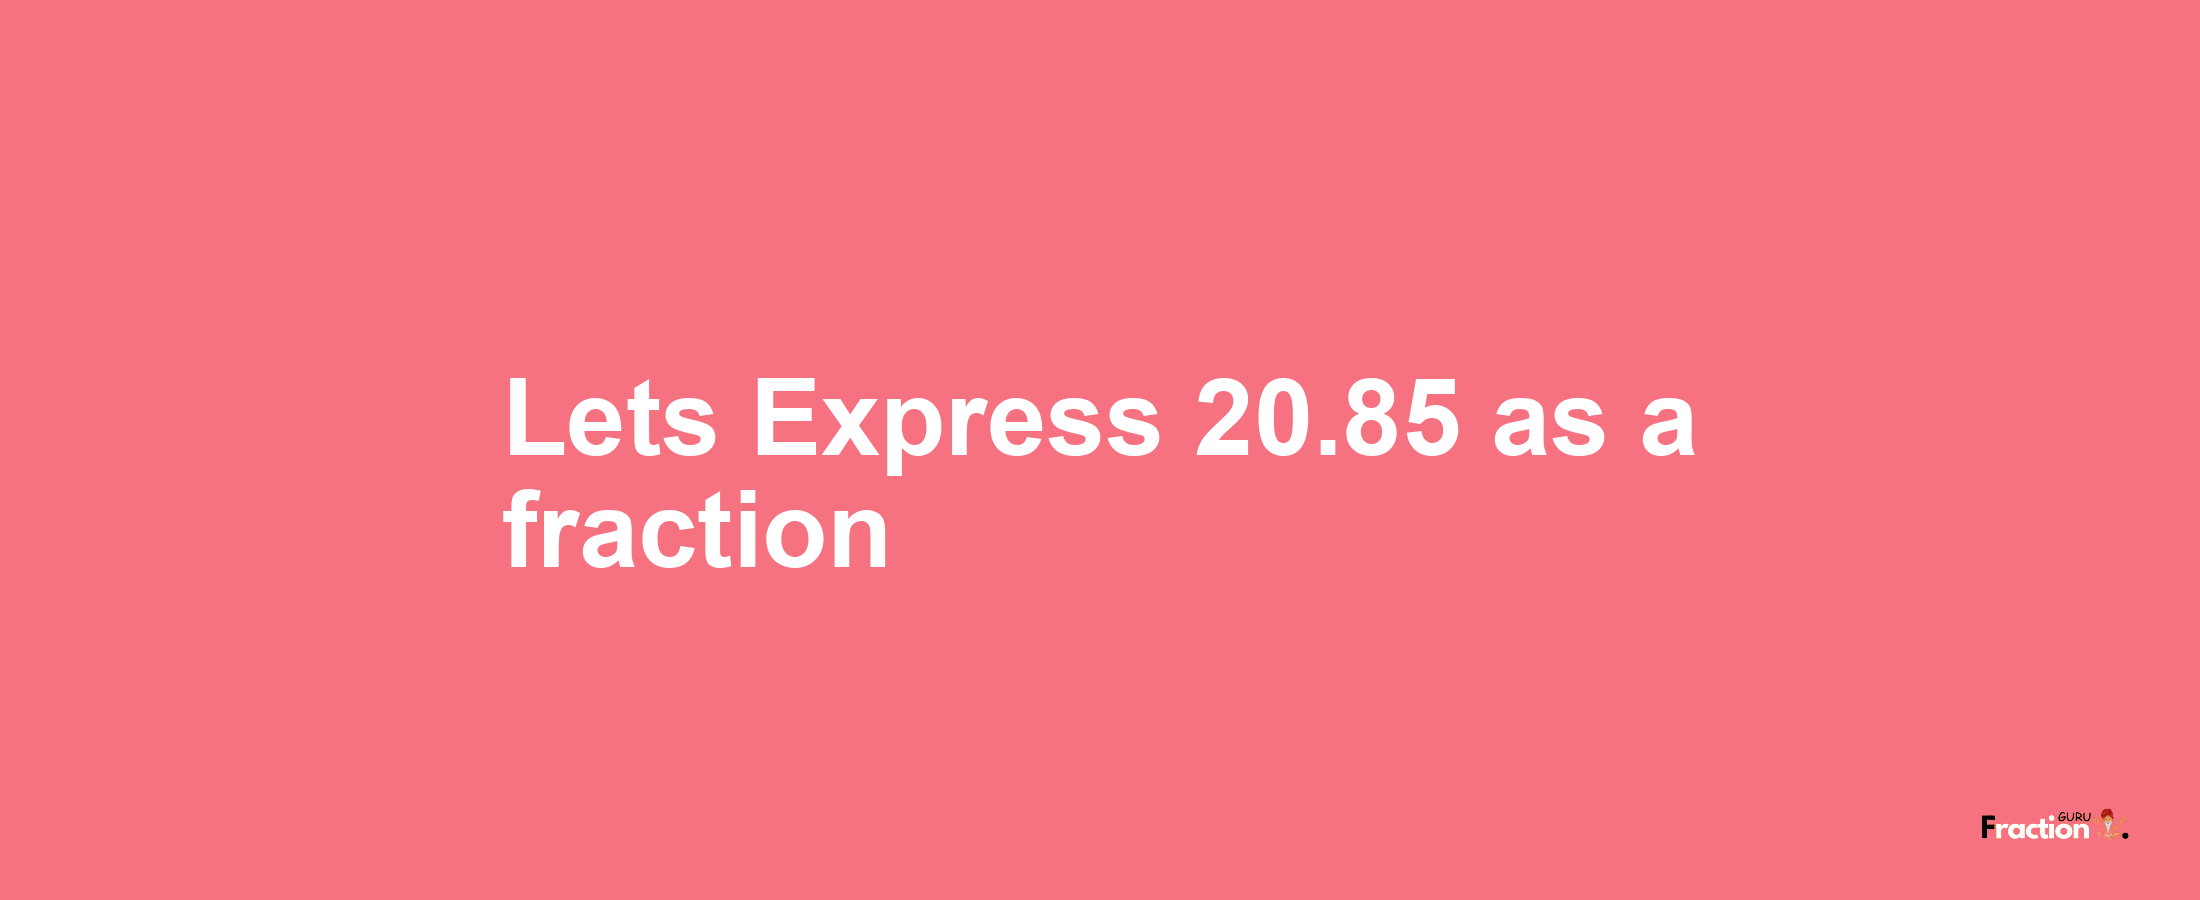 Lets Express 20.85 as afraction